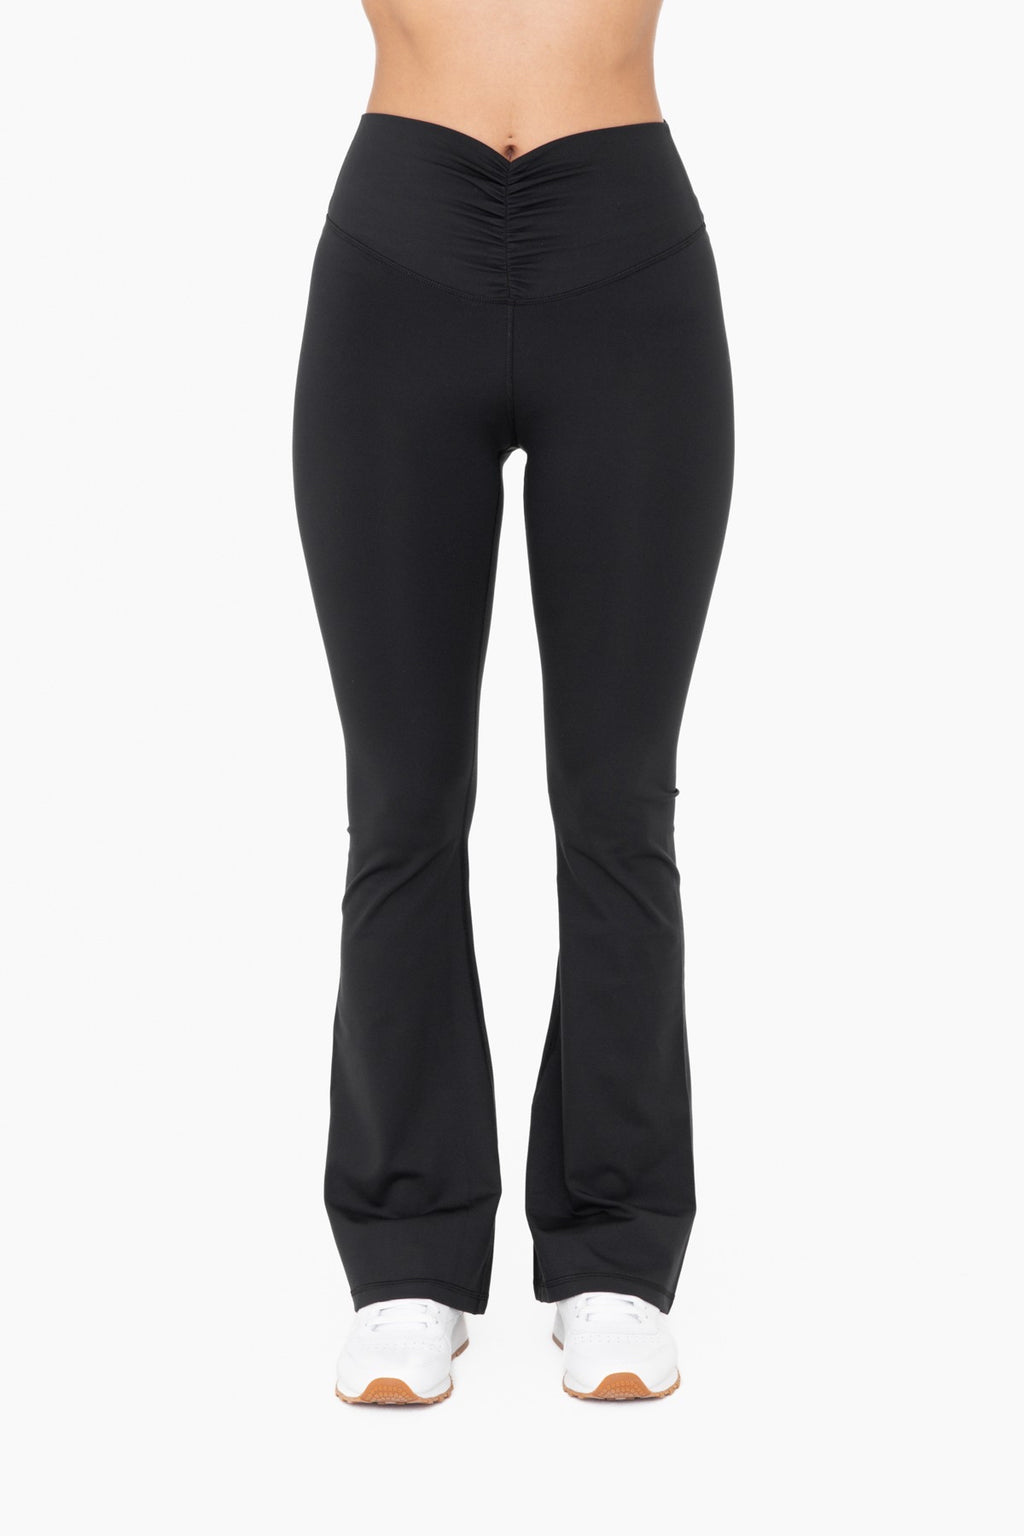 Mono B Tapered Band Solid Cropped Leggings with Back Pockets - Enterprise  Crossing LLC.